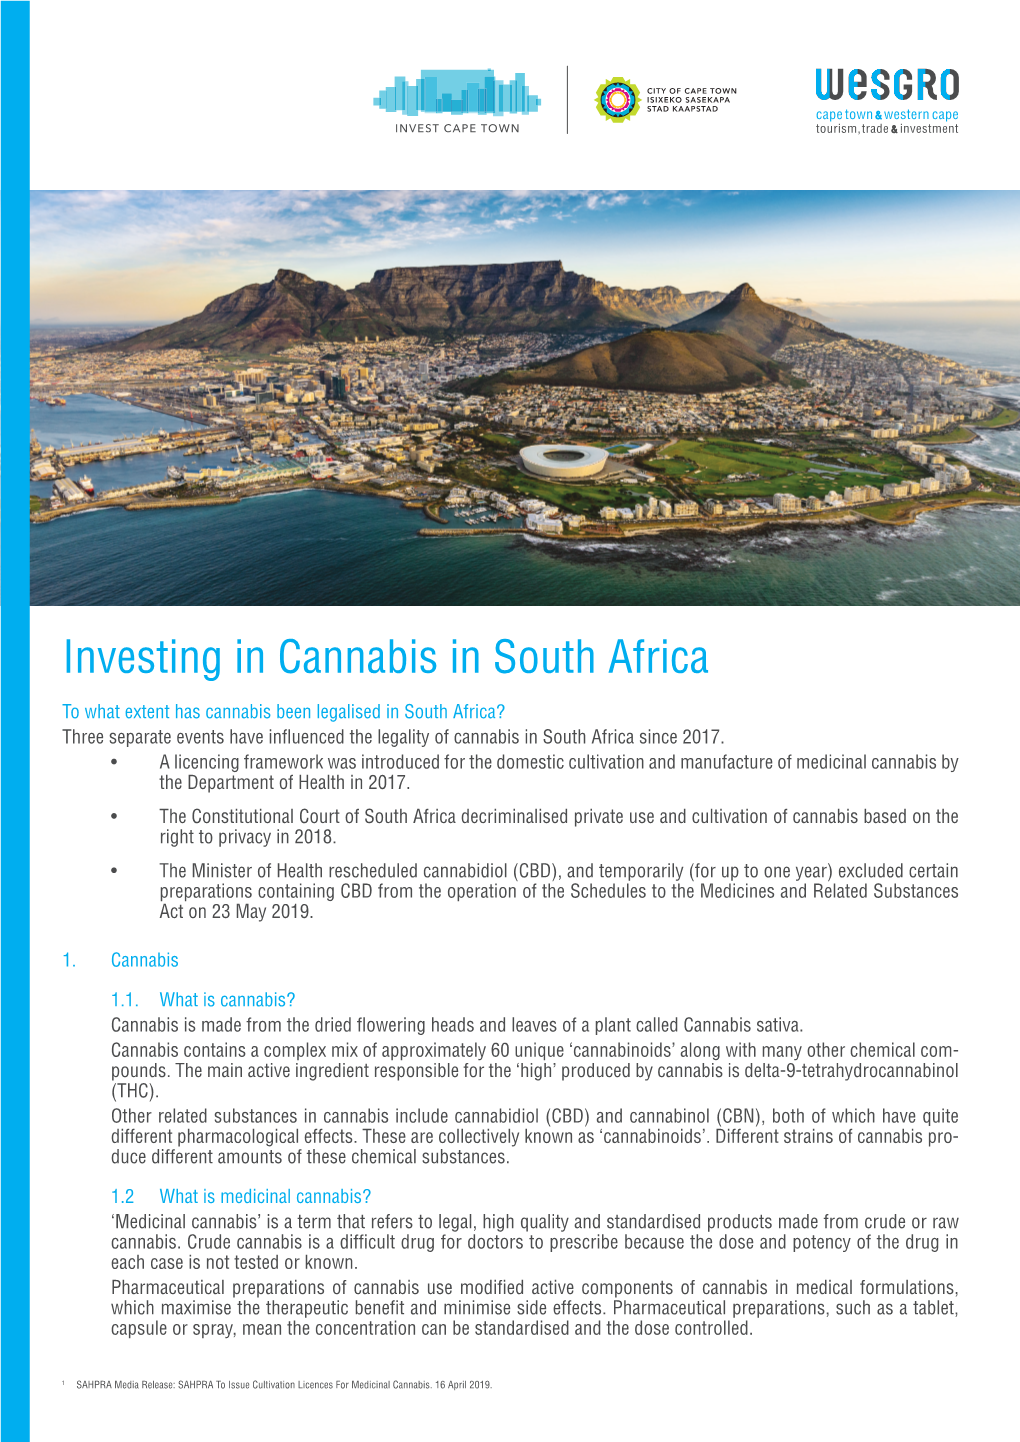 Investing in Cannabis in South Africa